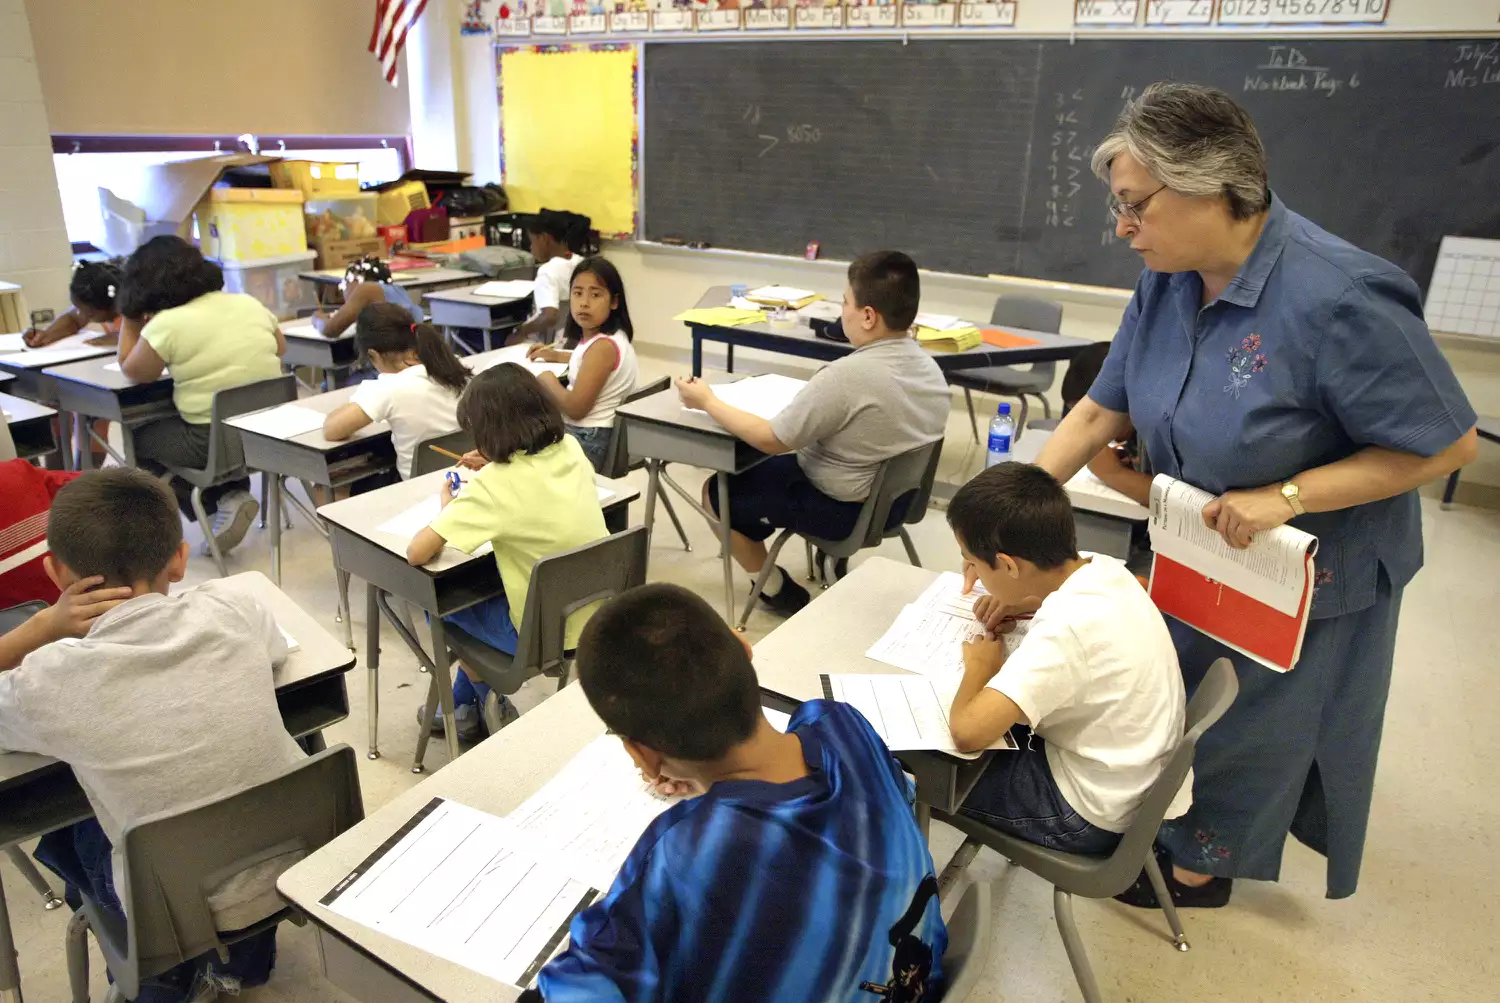 School Testing Assesses Knowledge Gains and Gaps